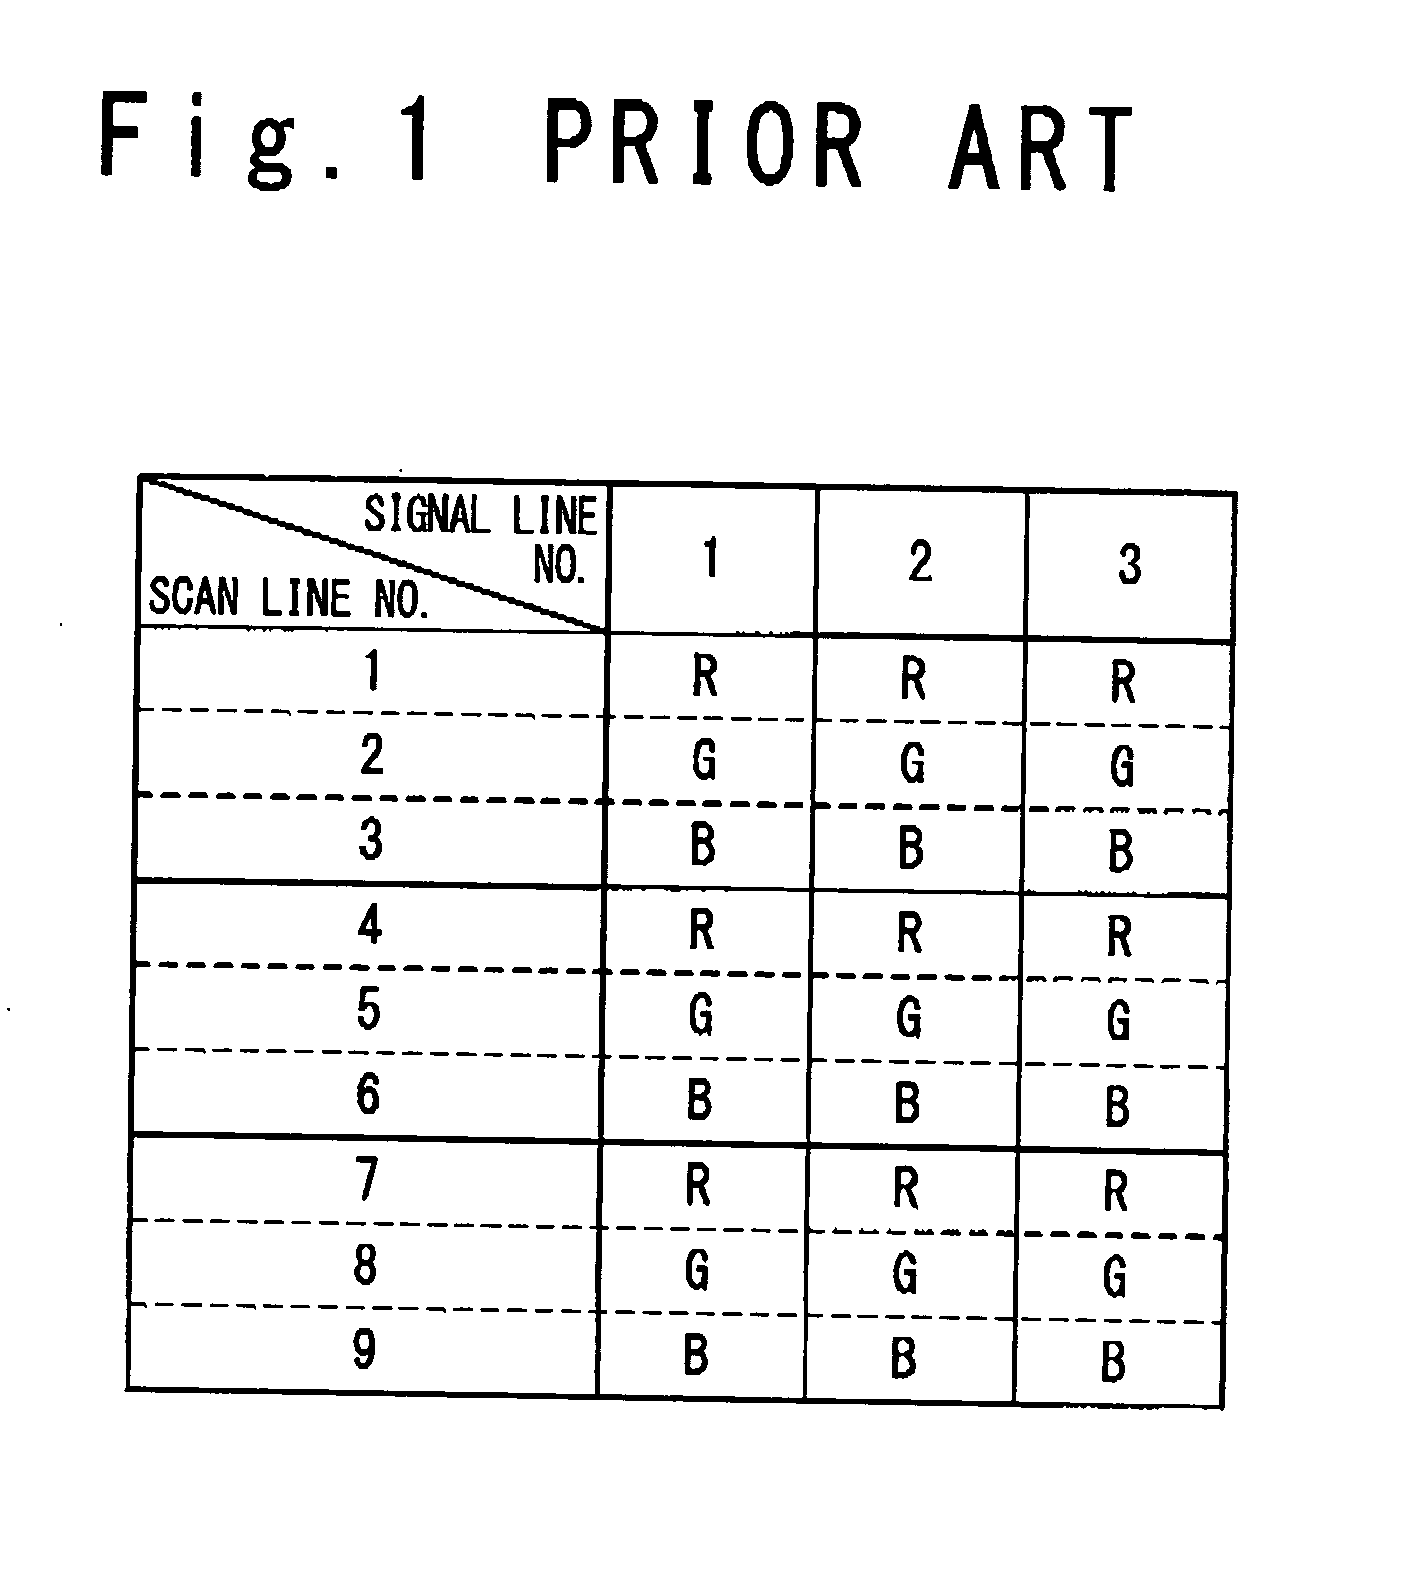 Method for driving liquid crystal display panel with triple gate arrangement